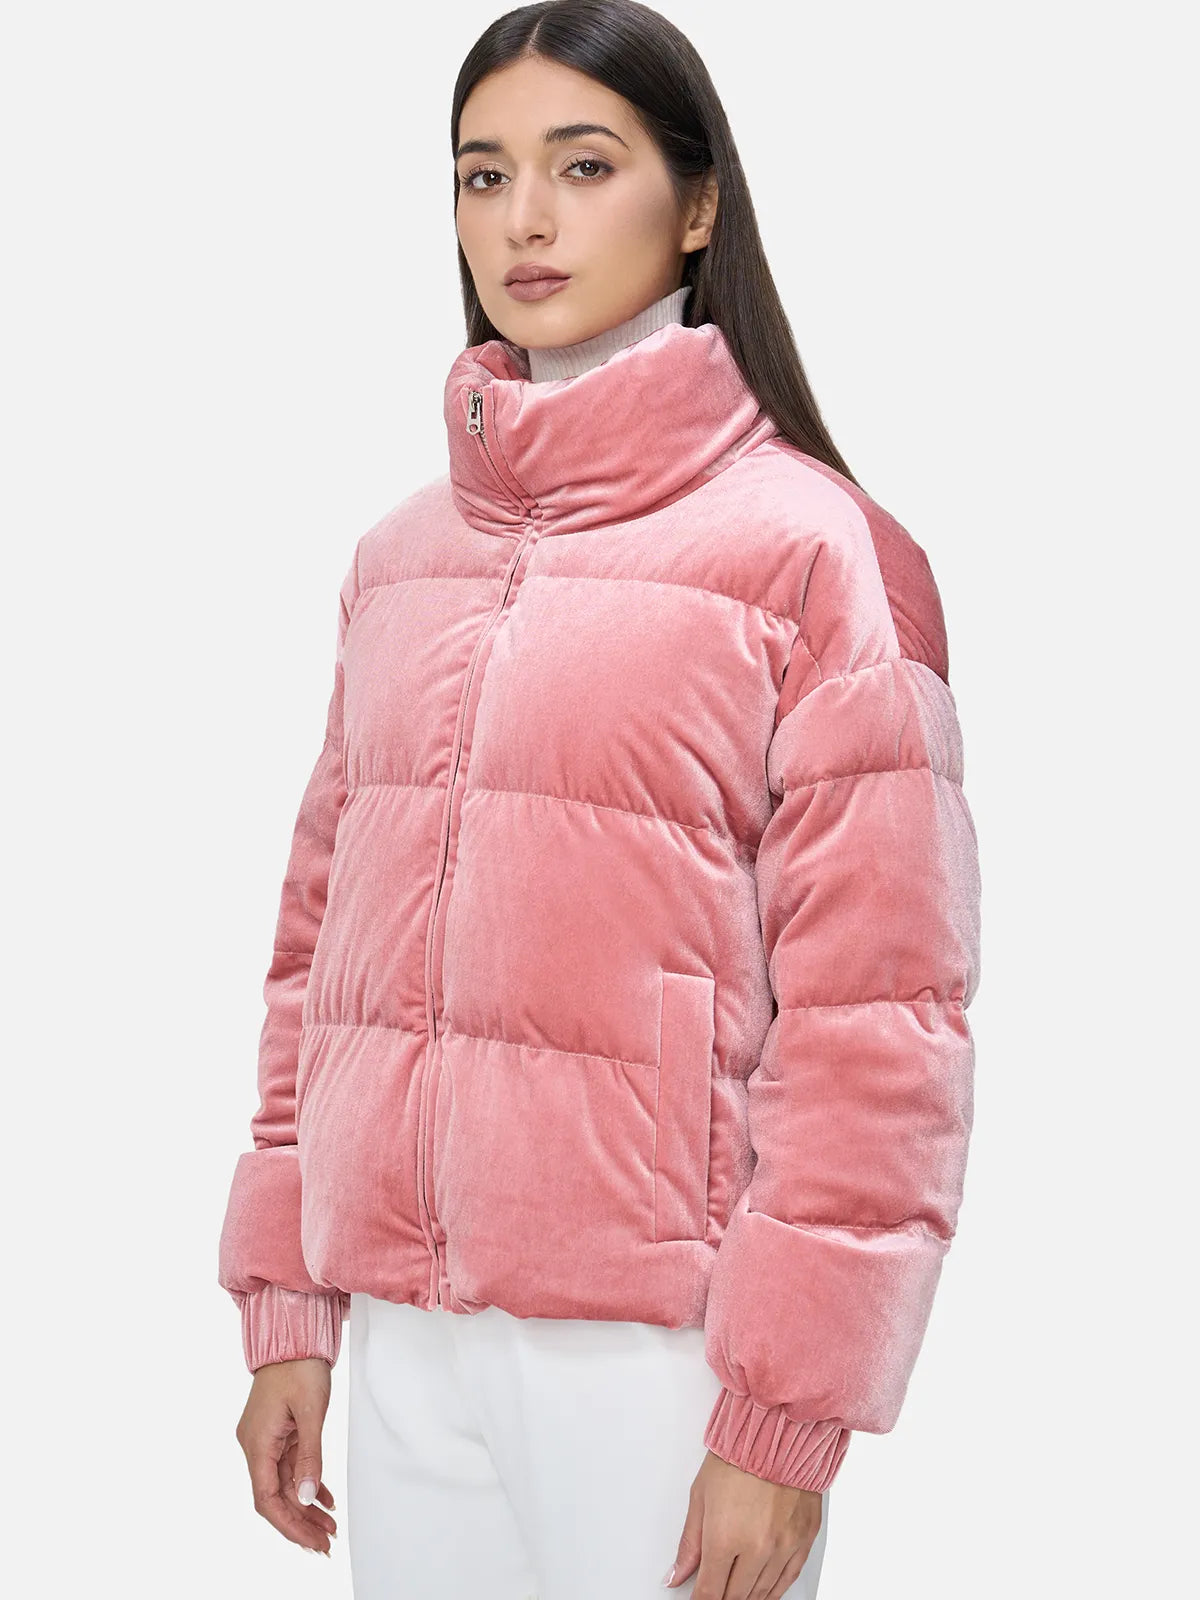 Elevate Your Style with an Elegant Stand Collar Puffer Jacket